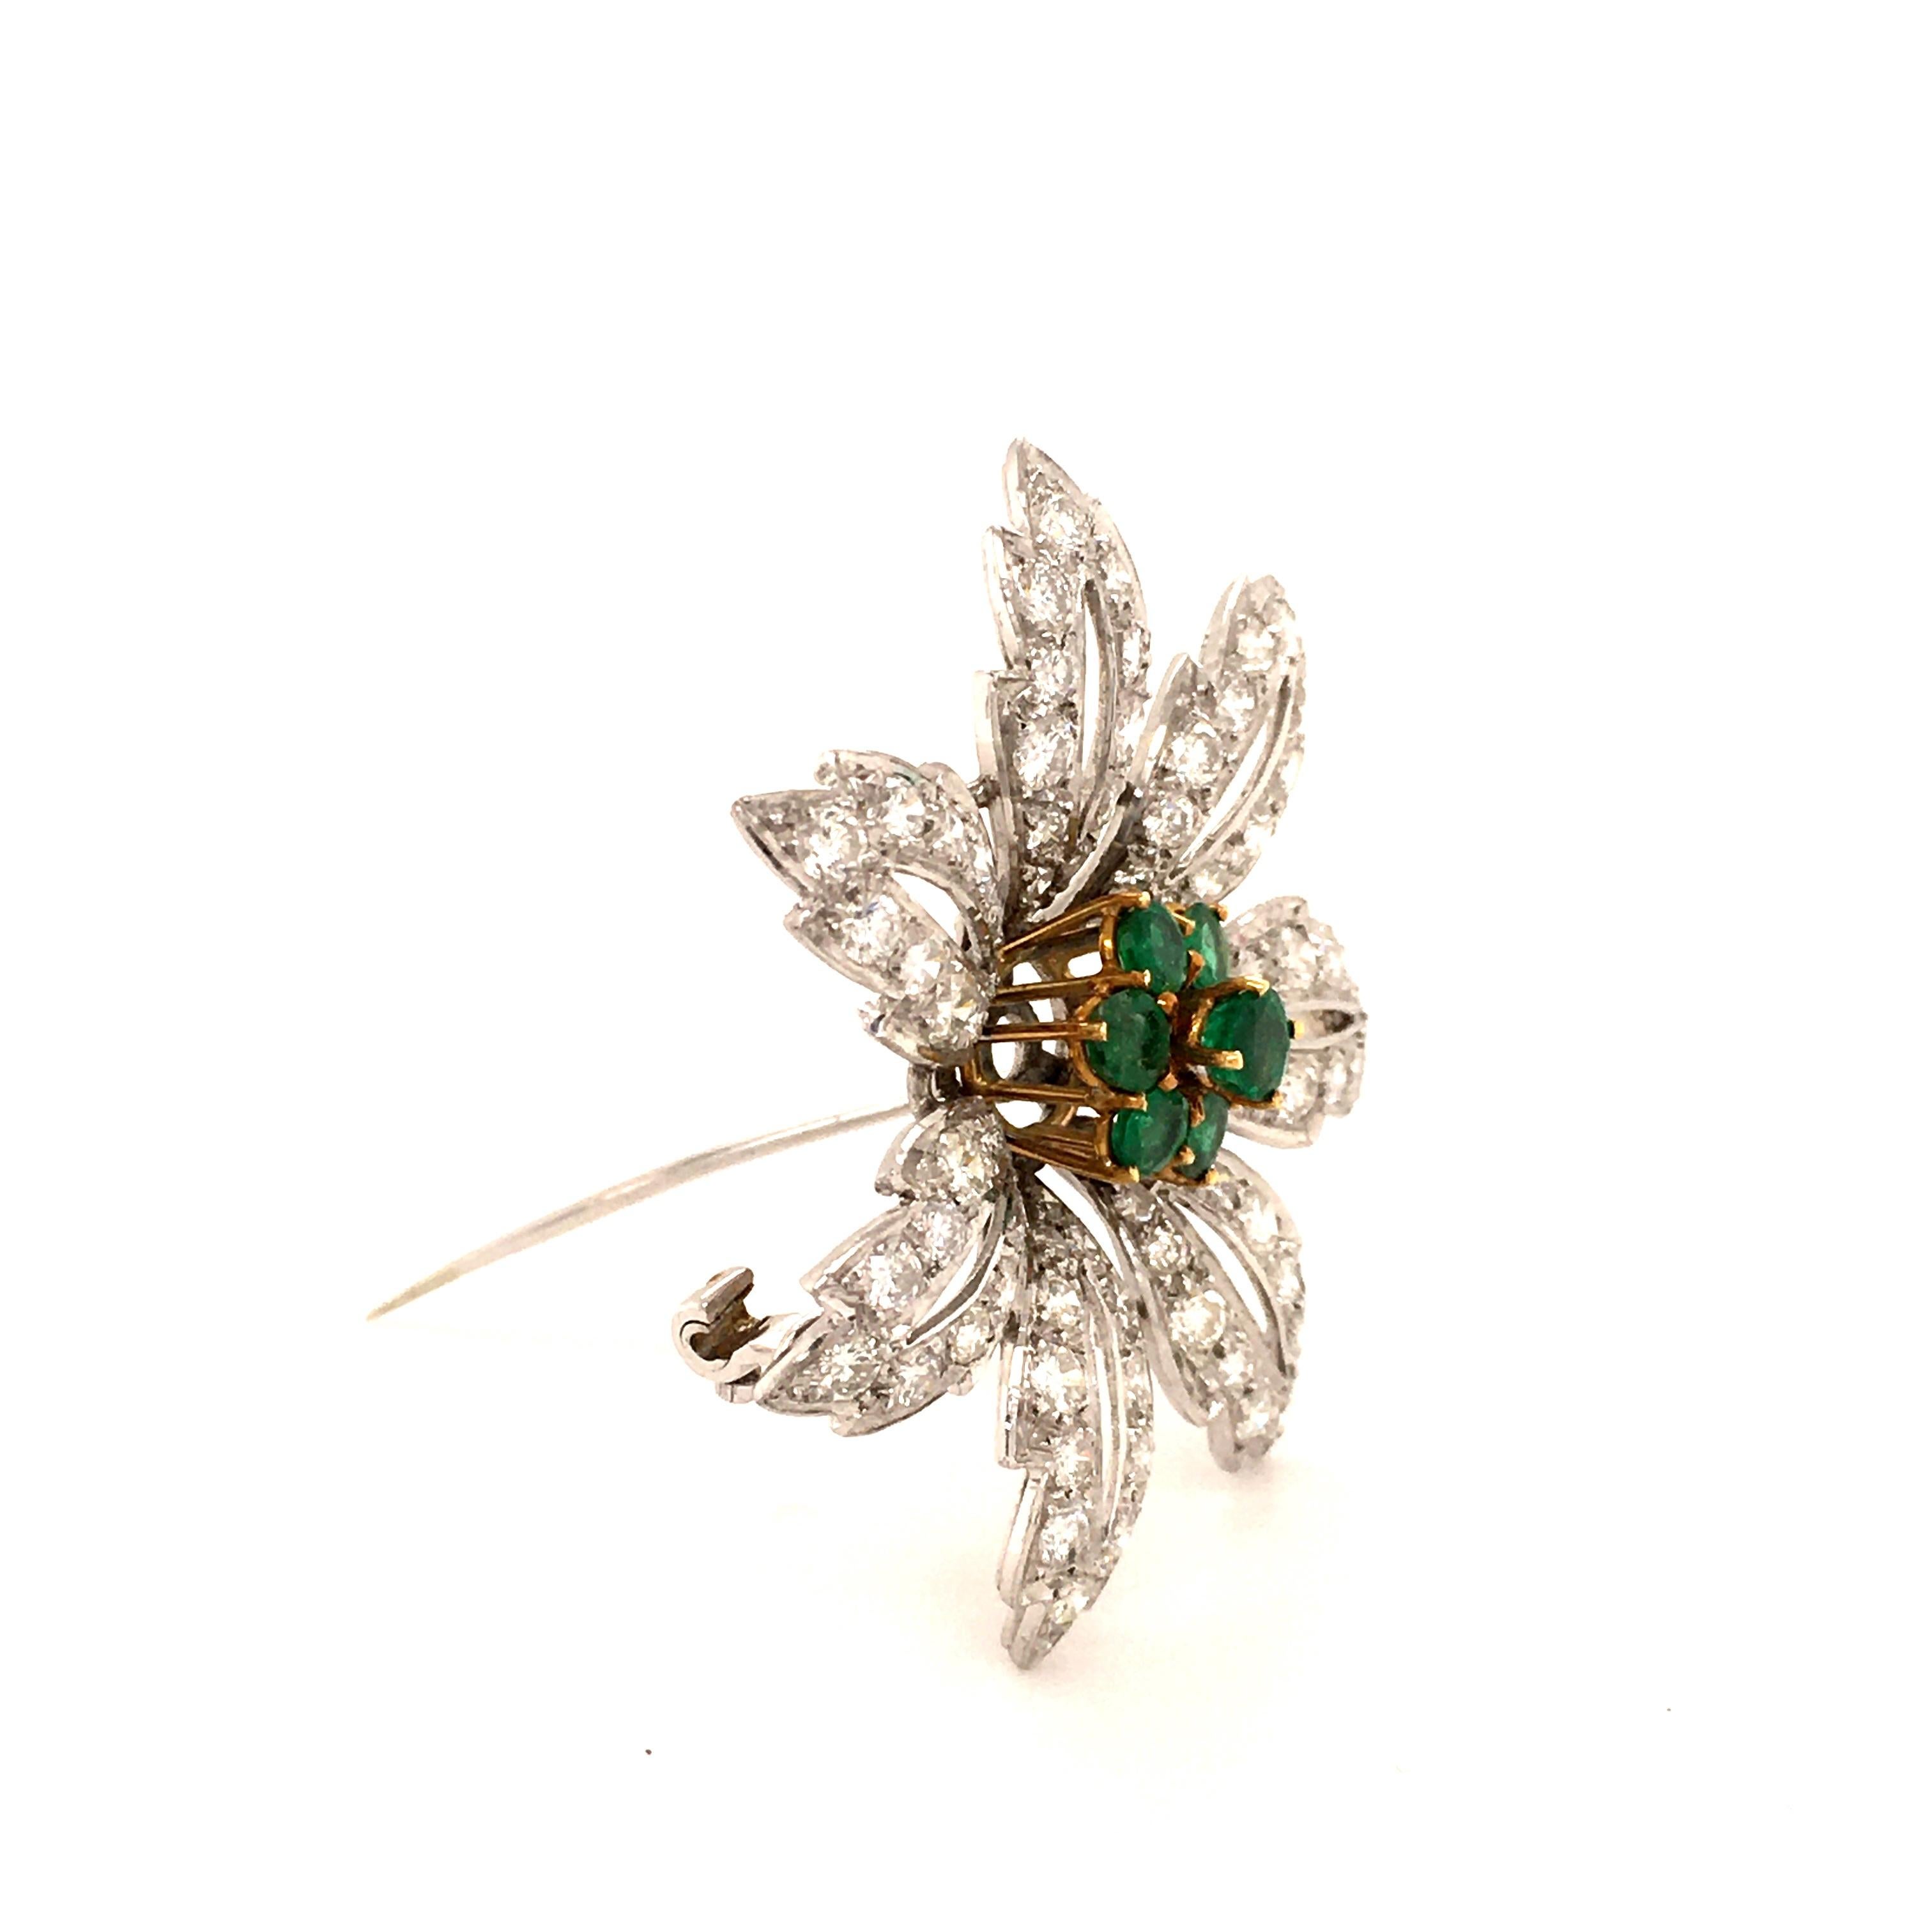 Round Cut Emerald and Diamond Flower Brooch in 14 Karat White and Yellow Gold